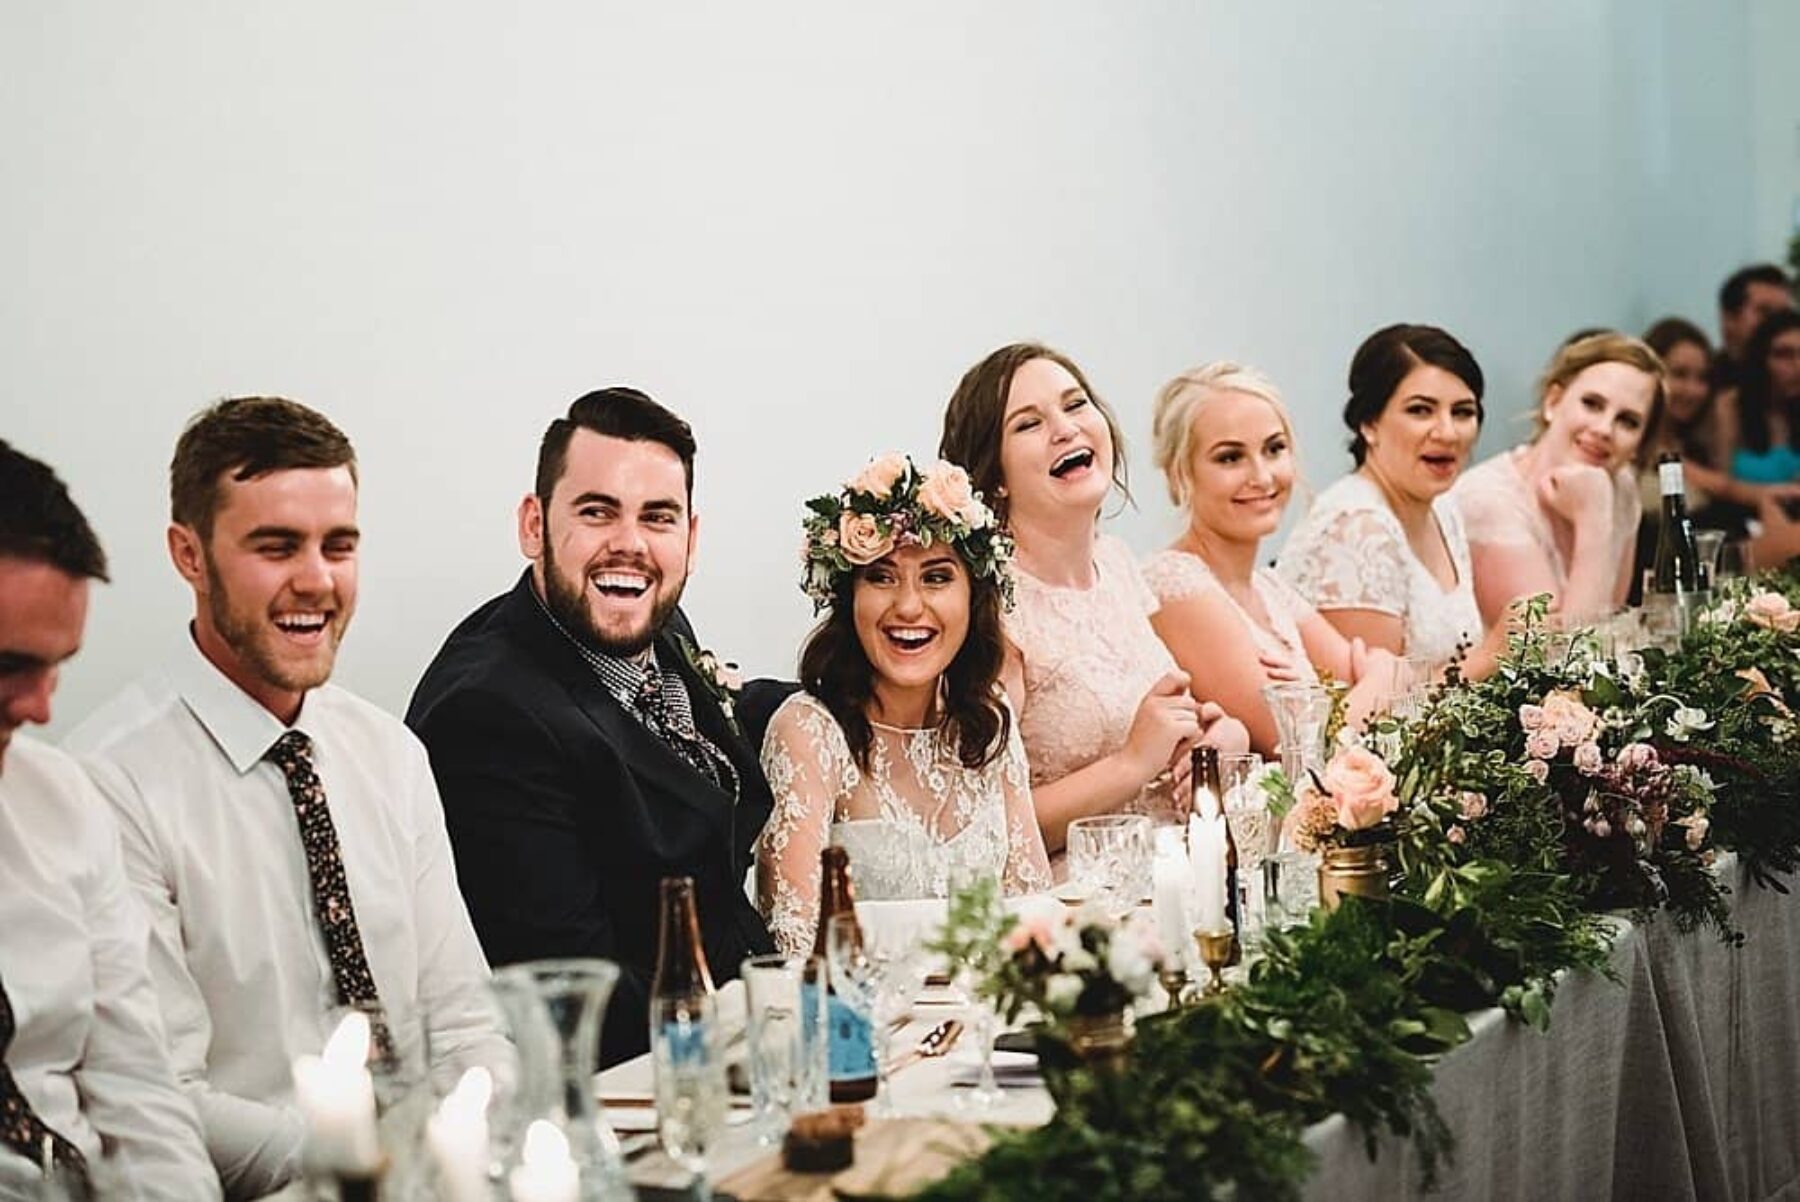 vintage-inspired wedding at The Flour Factory Perth - CJ Williams photography